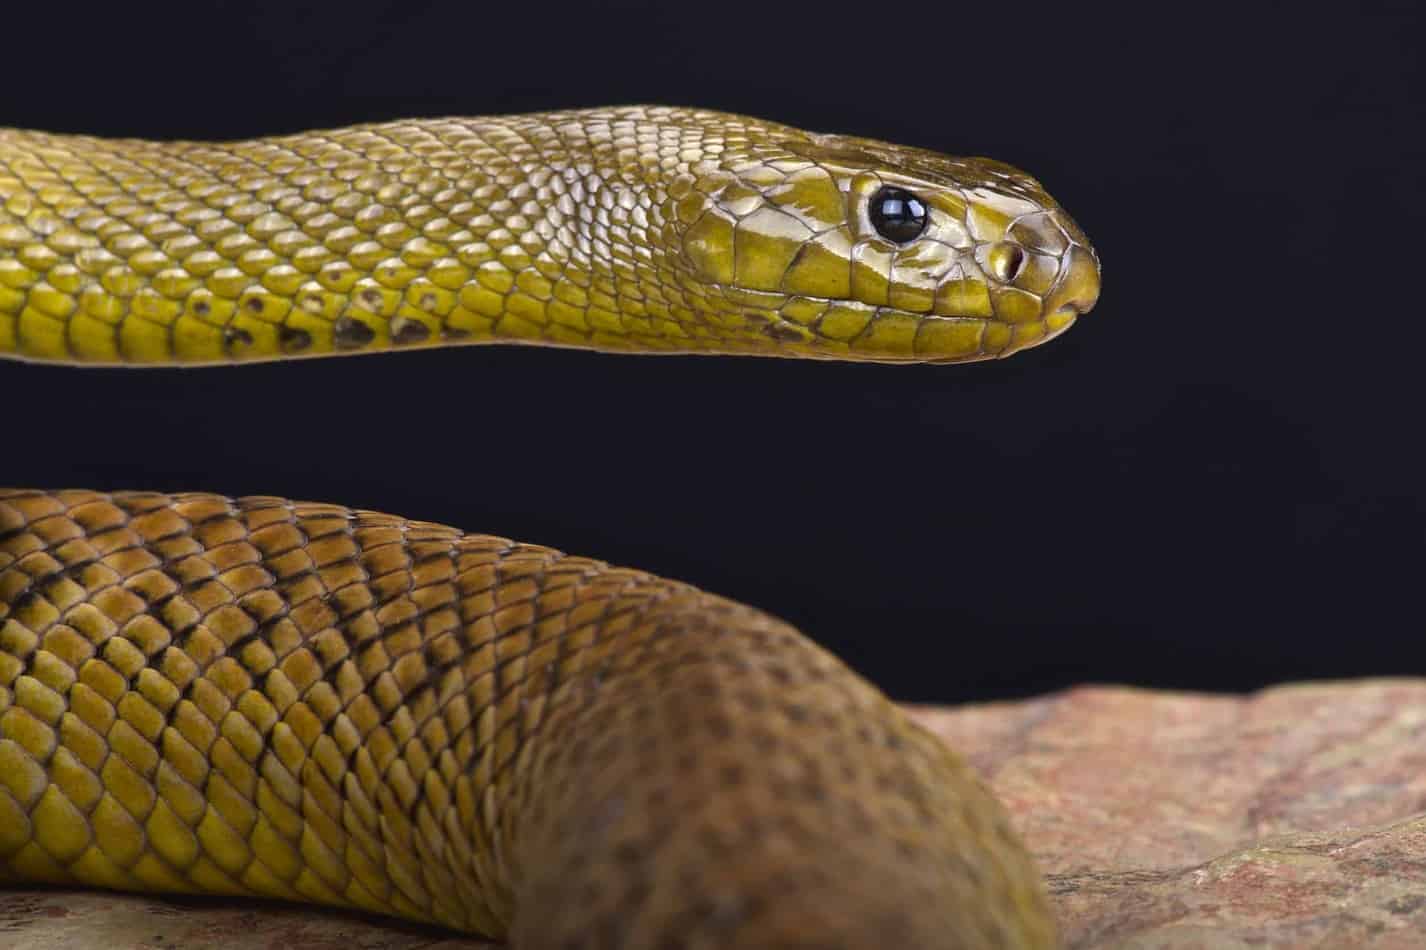 Most venomous snake in the world The Most Venomous Snake in the World